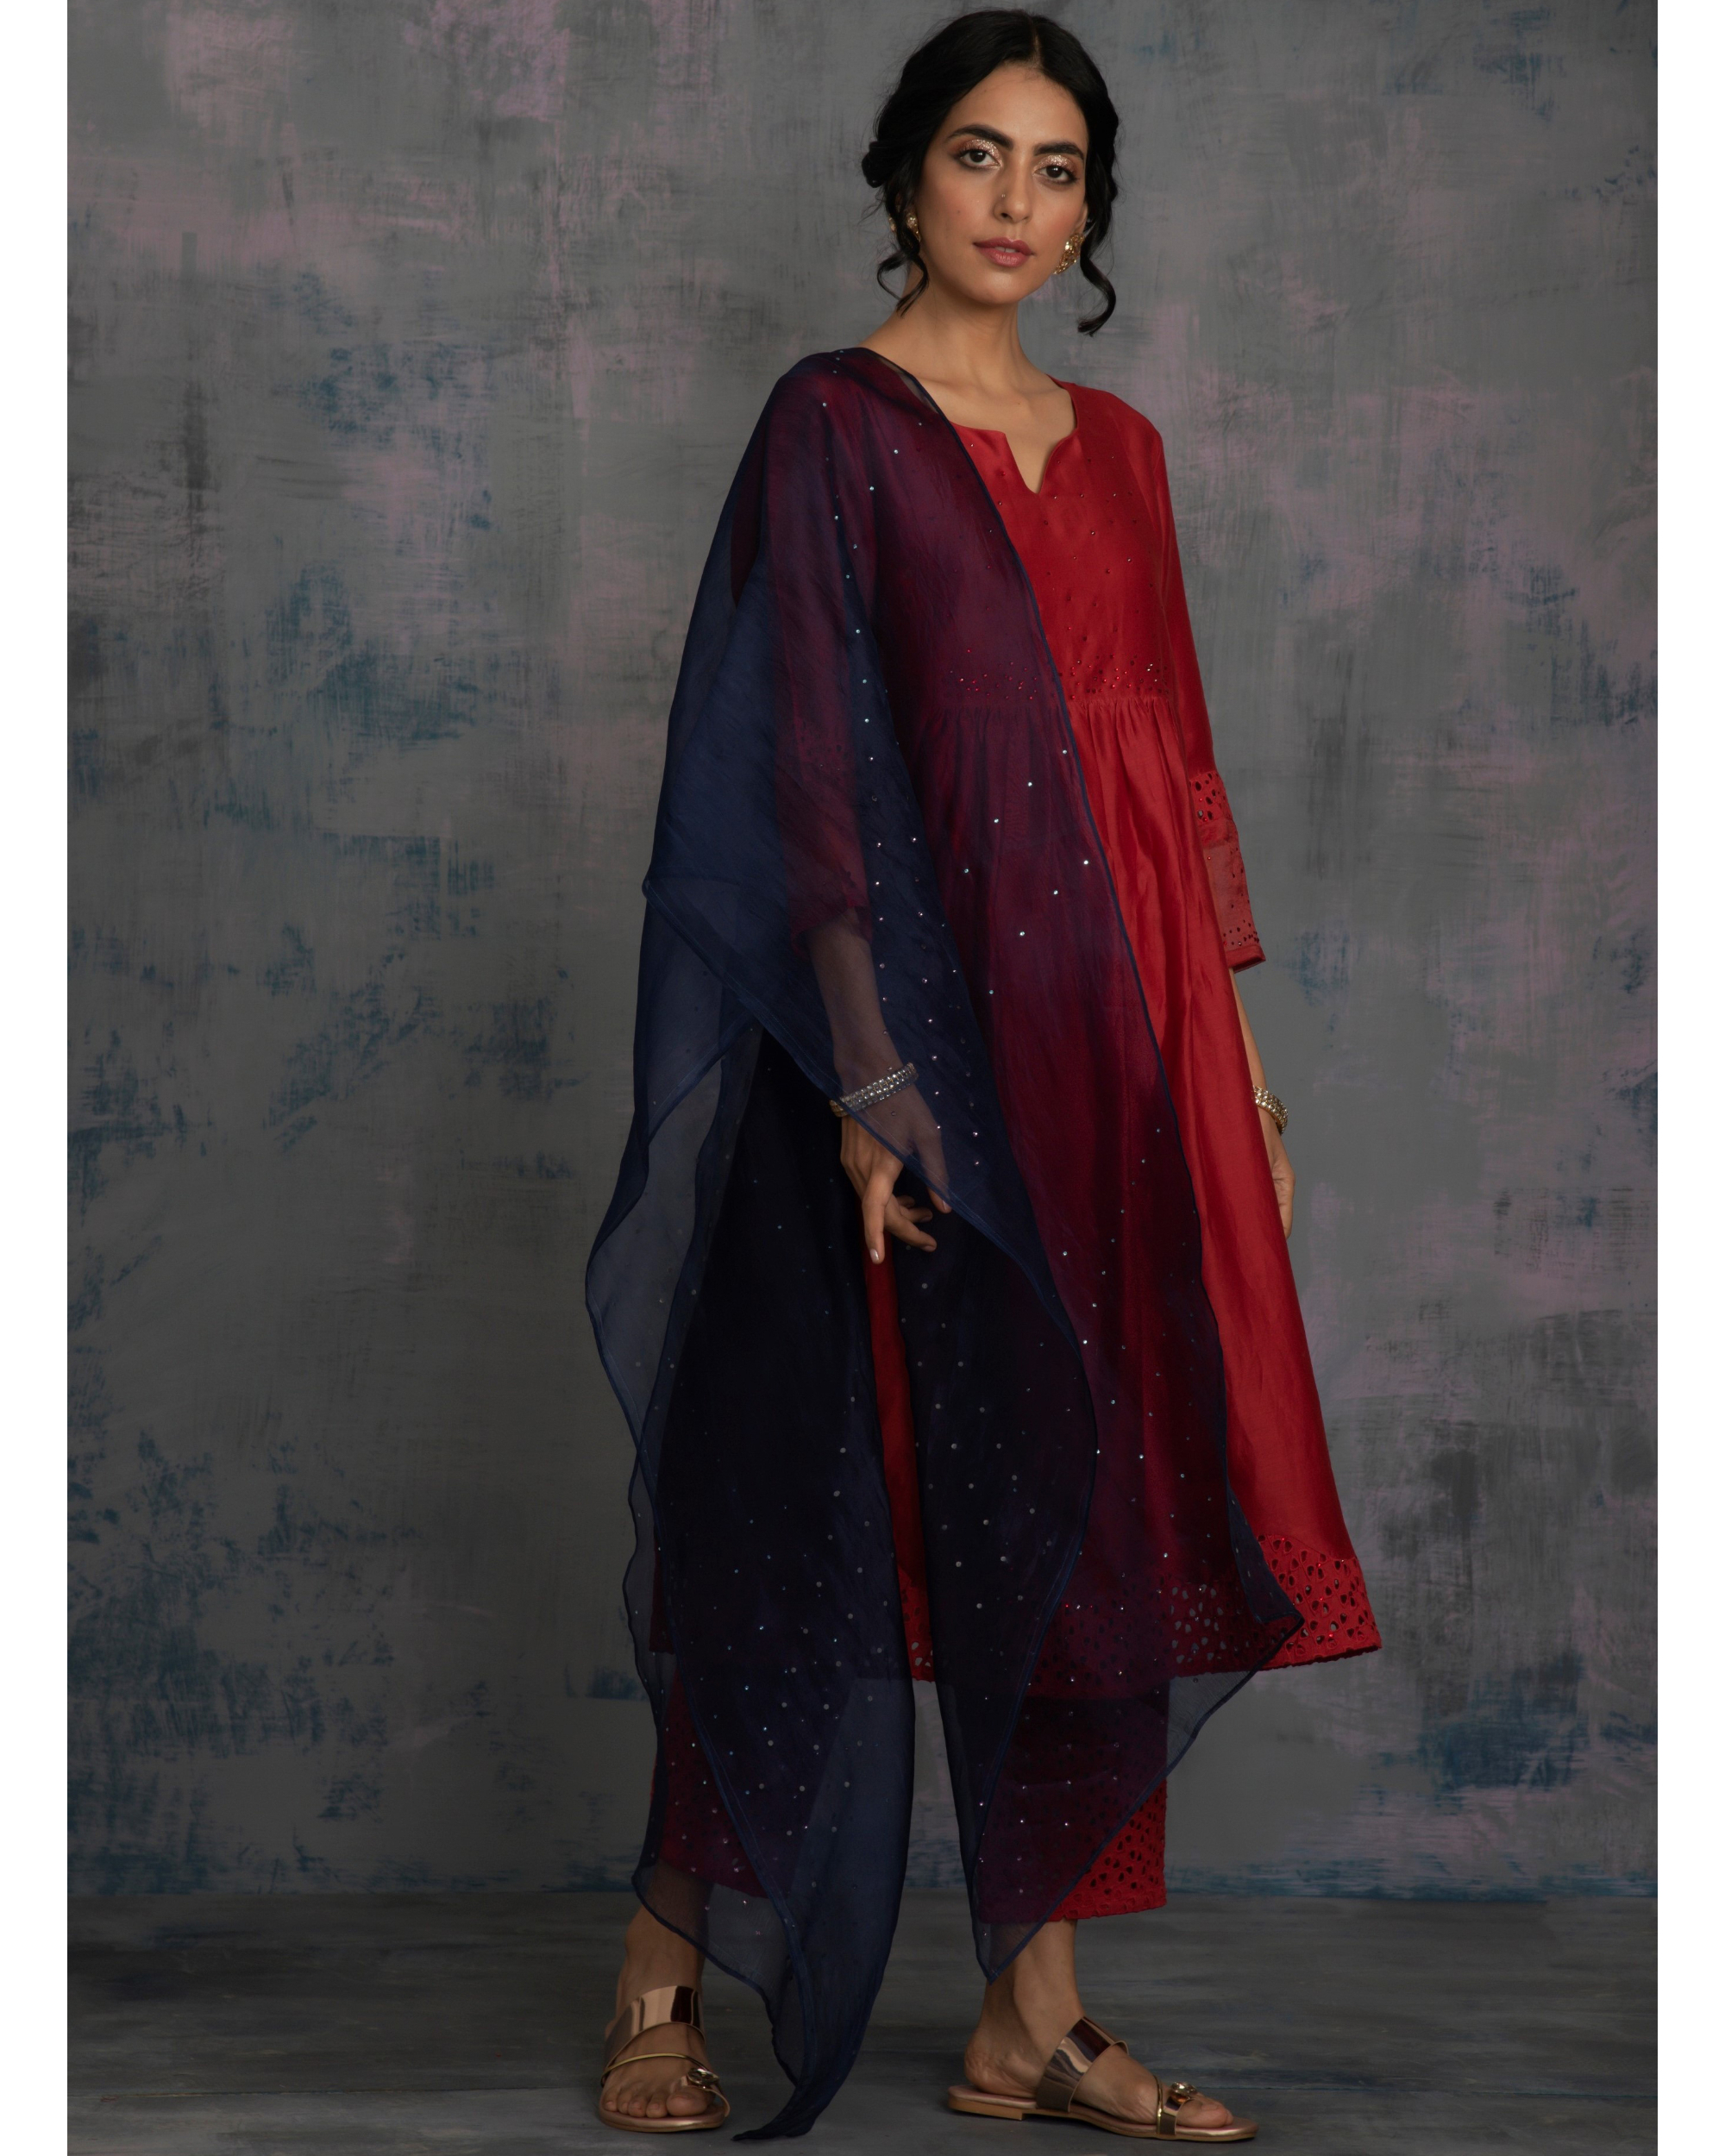 Scarlet red front gathered kurta with pants and midnight blue dupatta - set of three